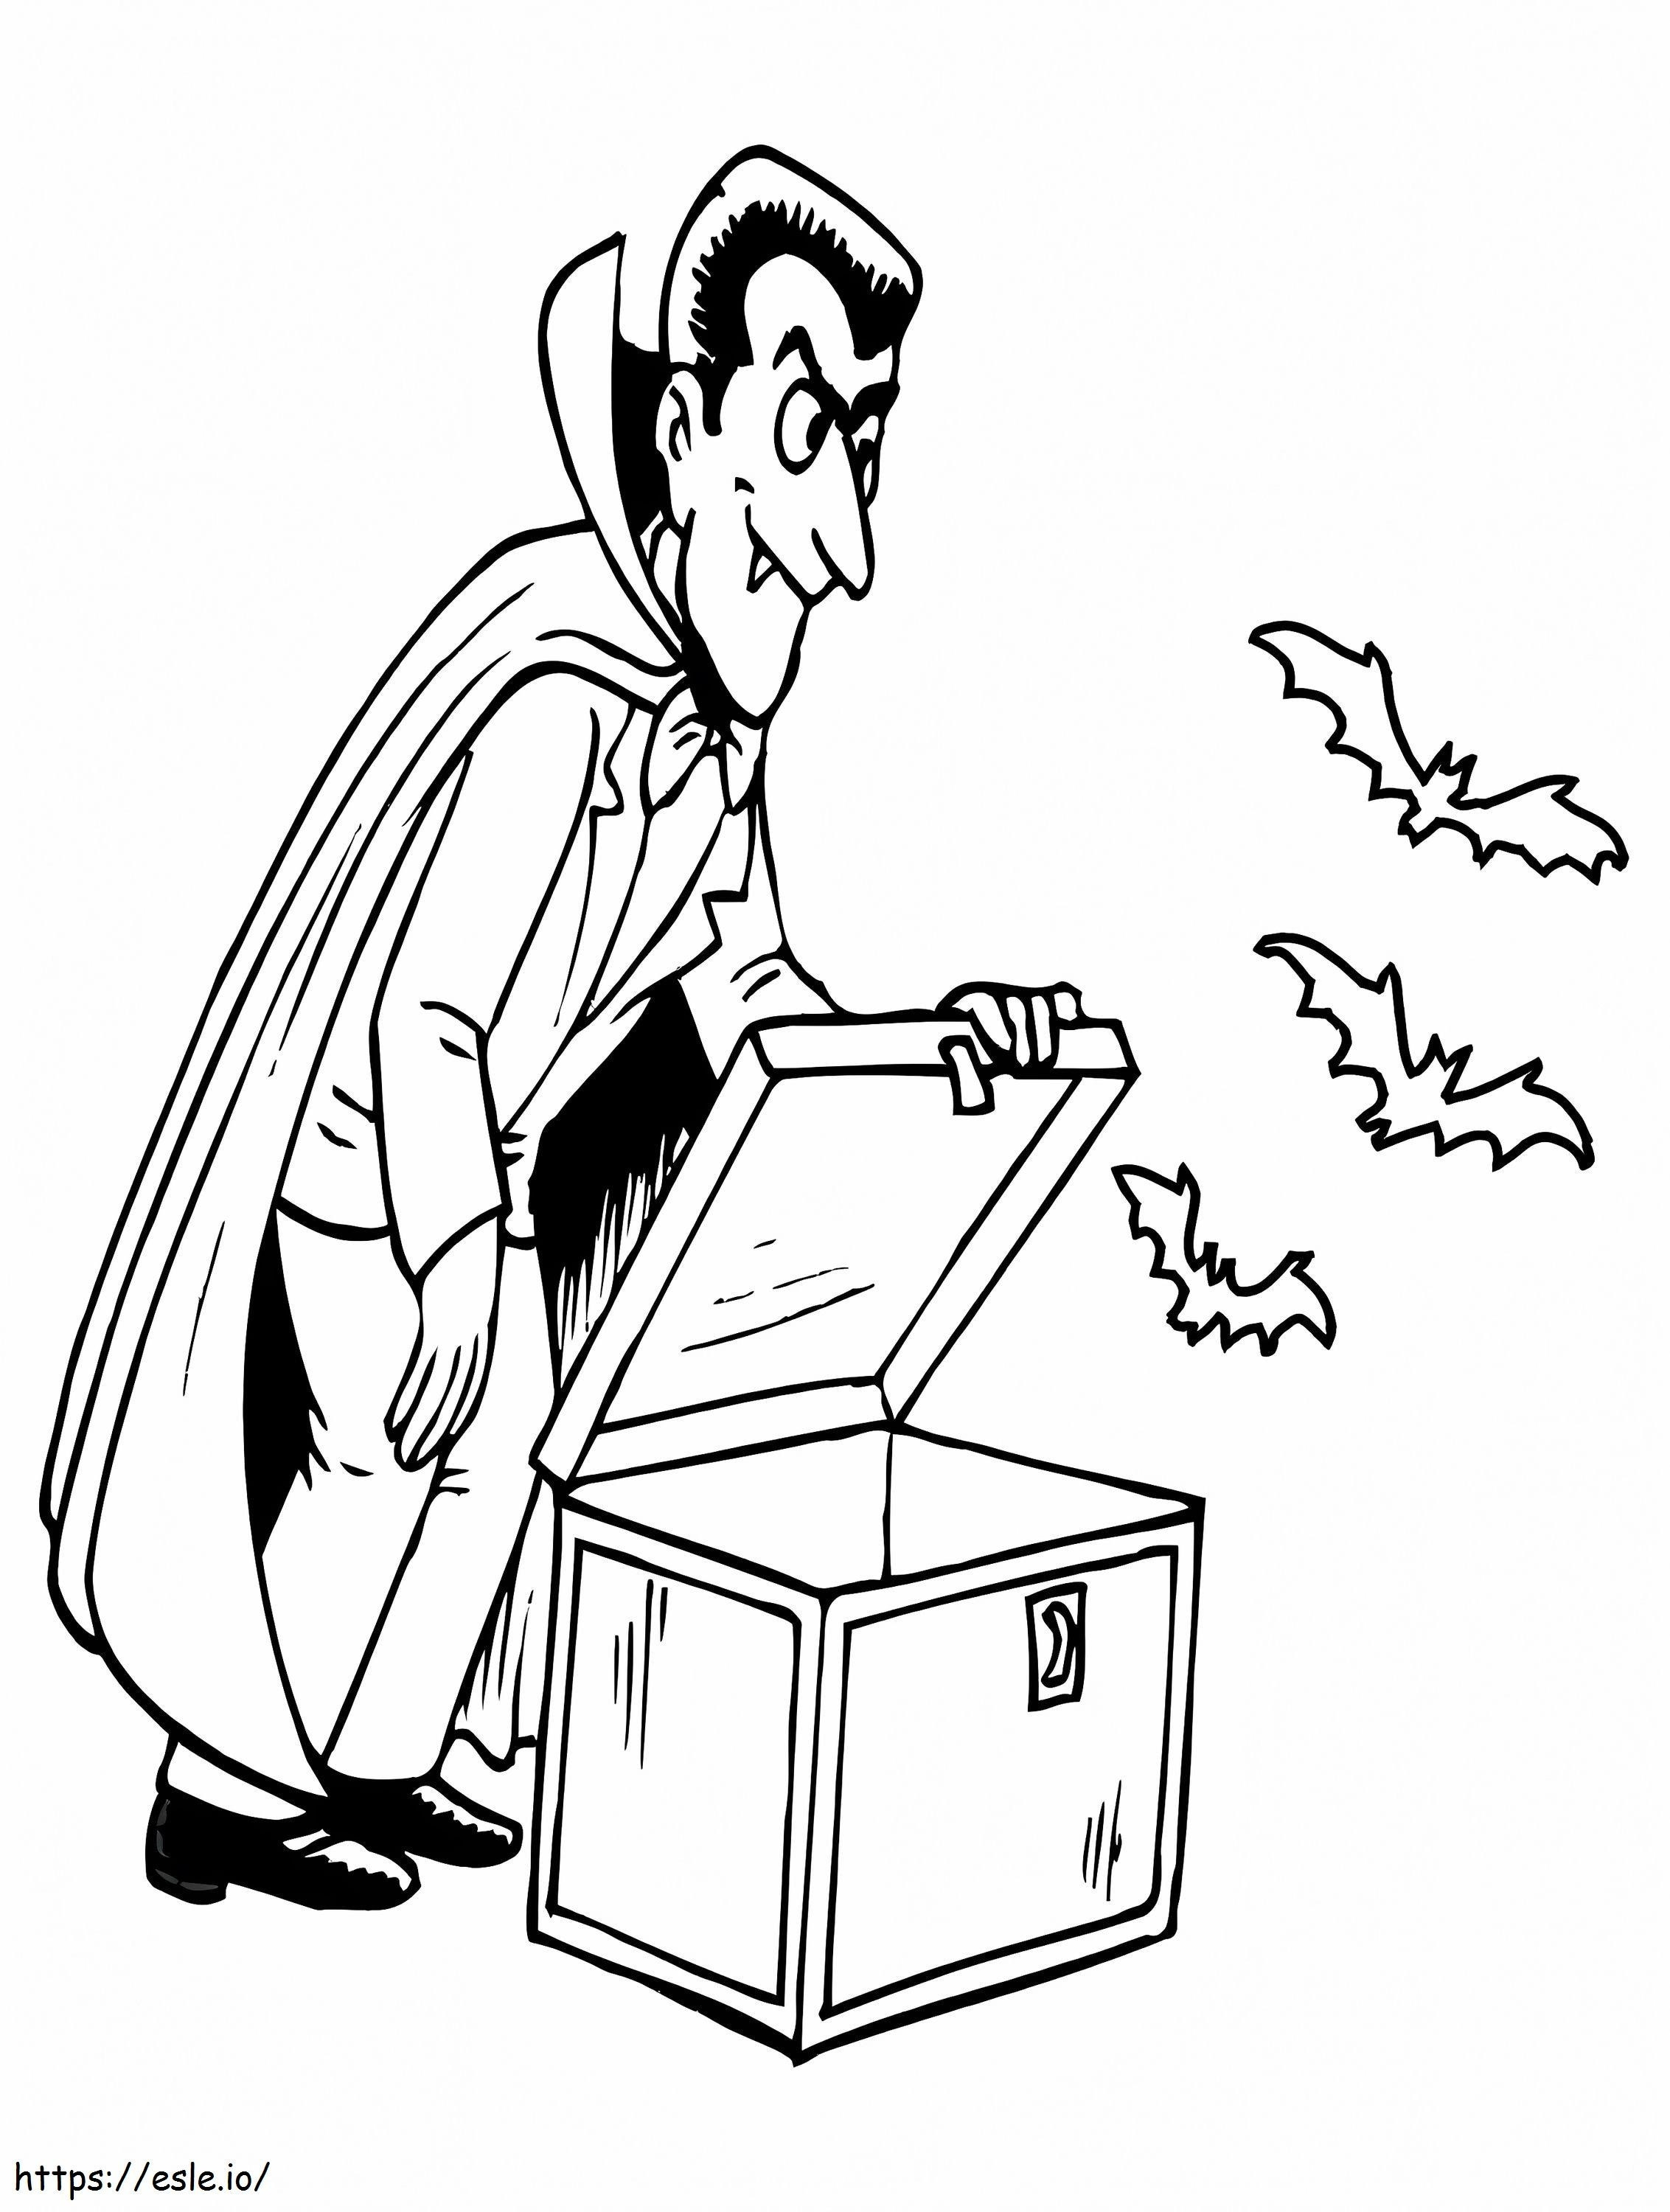 Vampire Releases Three Bats coloring page